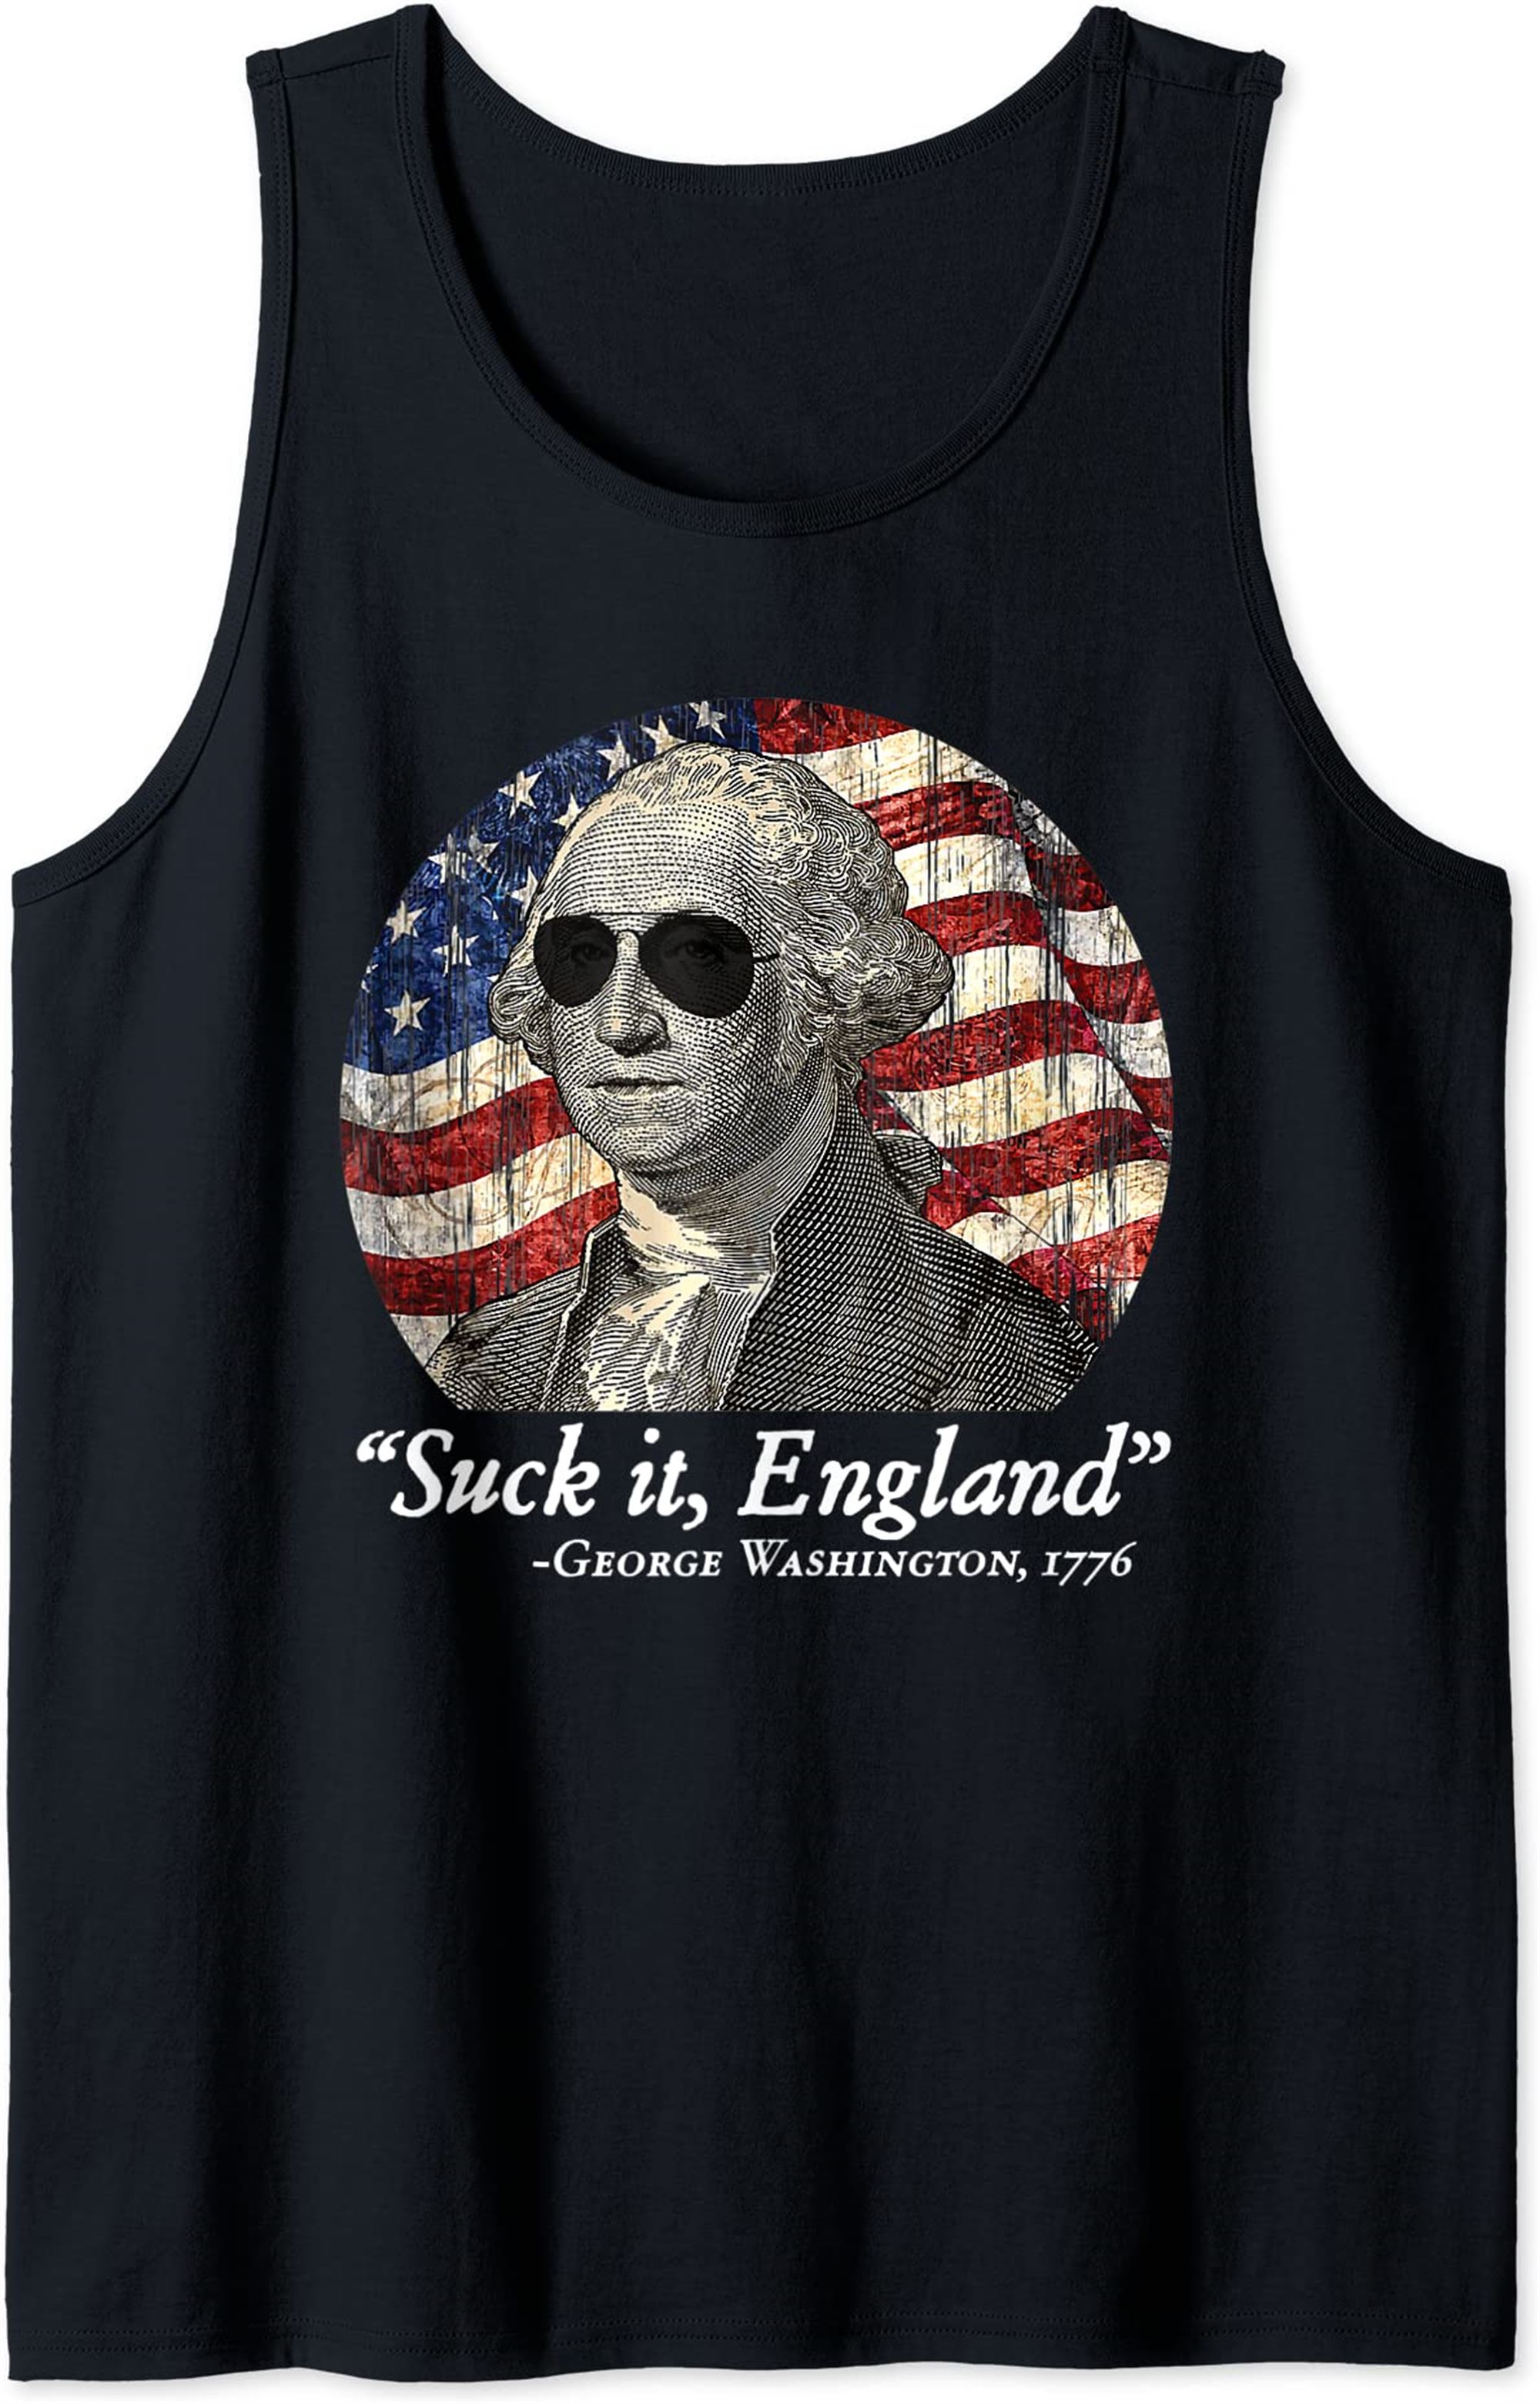 Suck It England Funny 4th Of July George Washington 1776 Tank Top Plus Size Up To 5xl